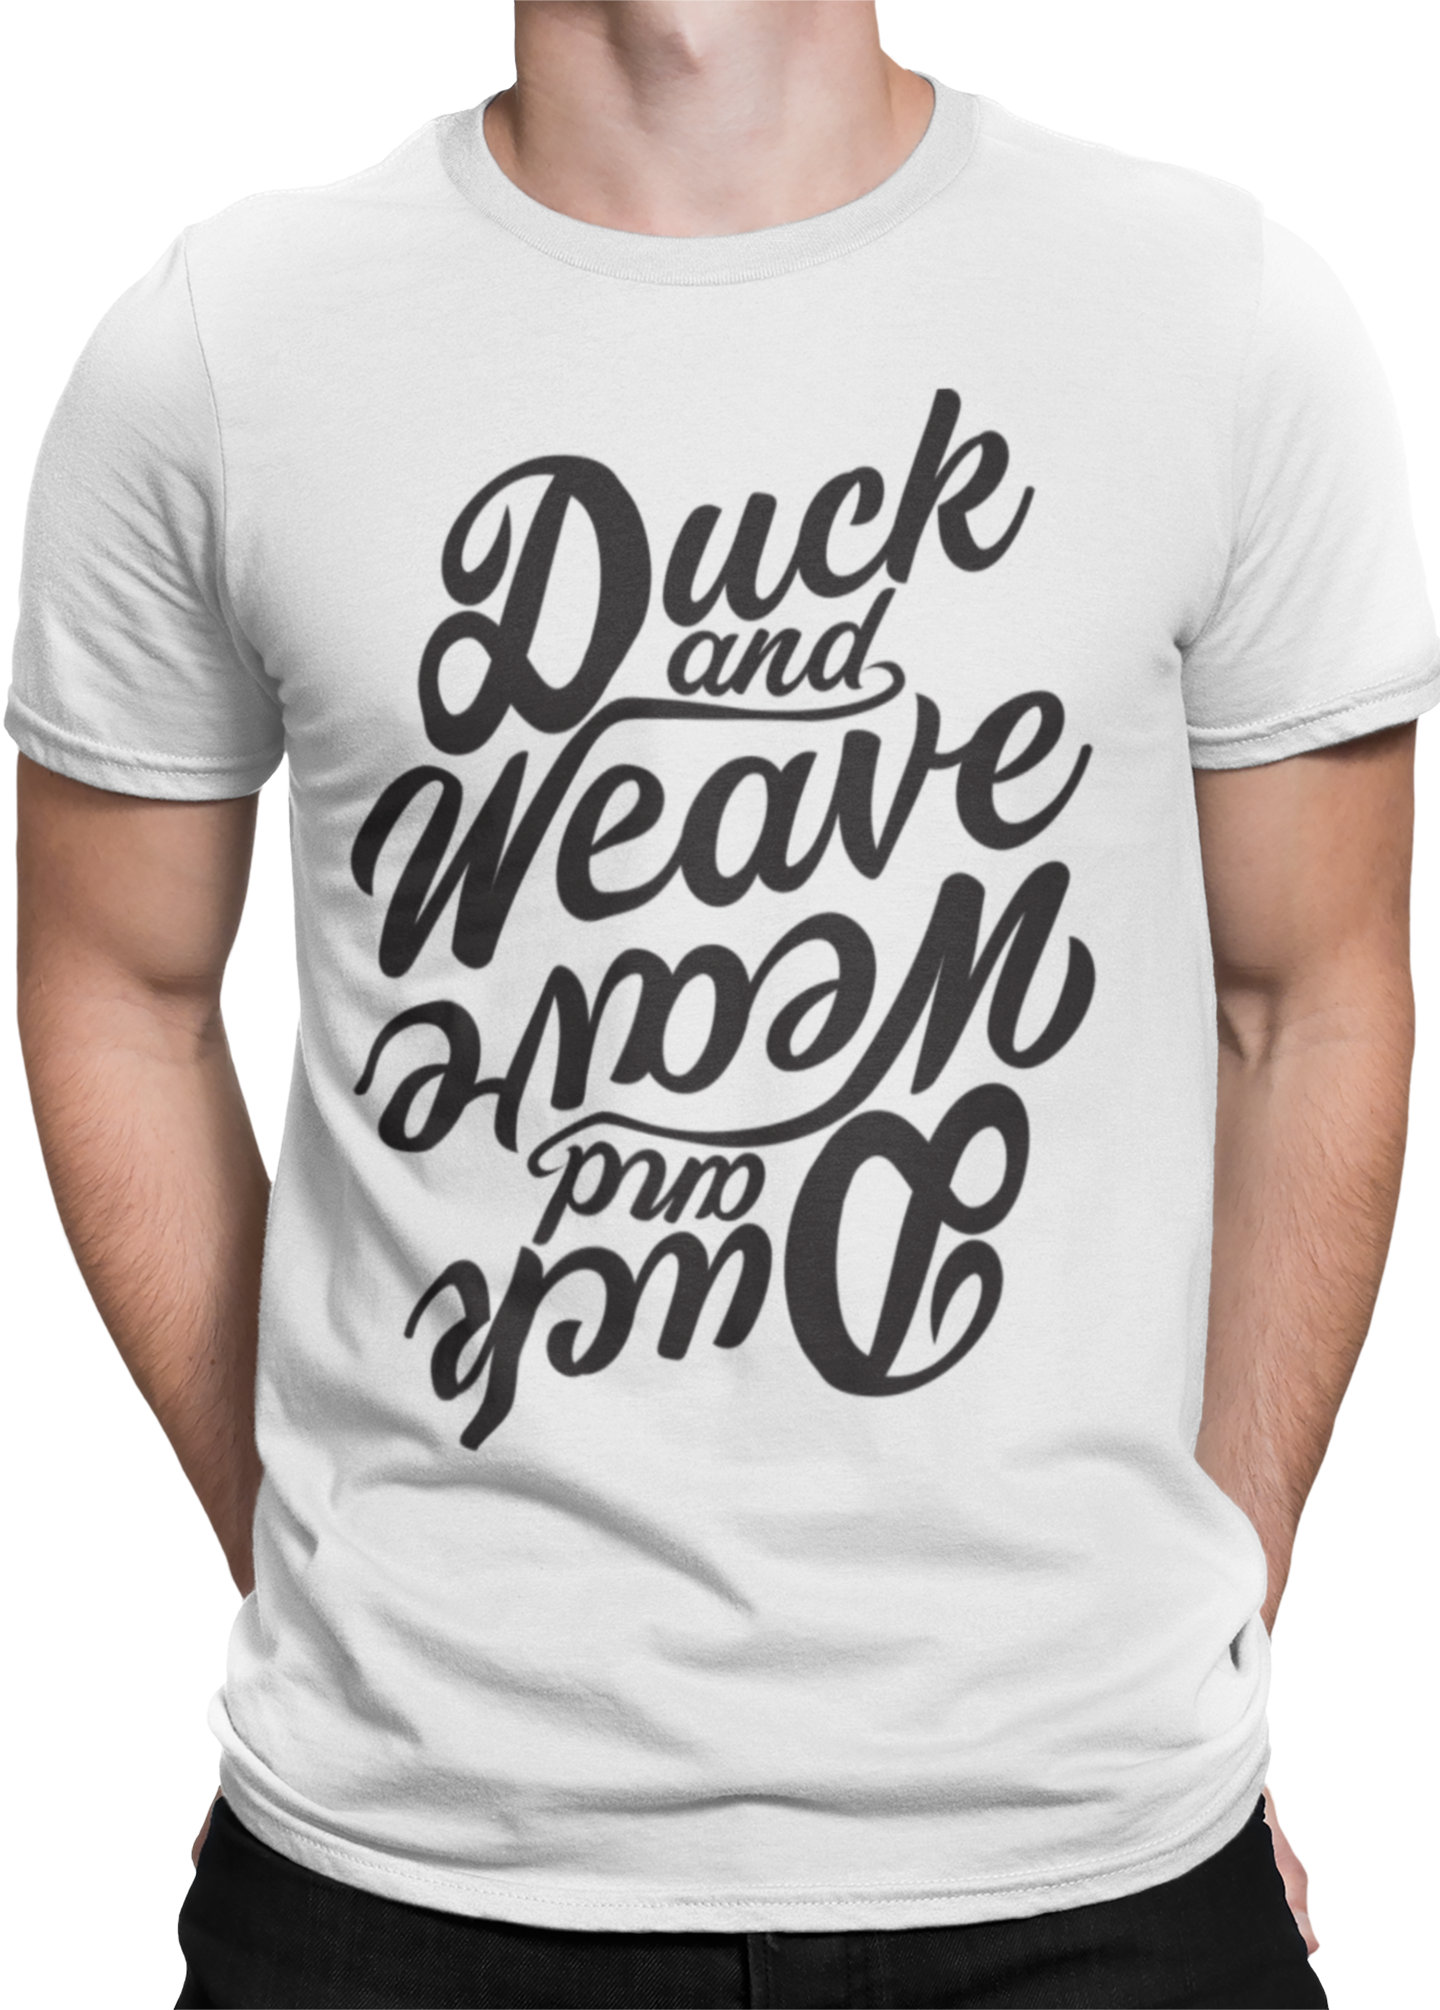 The Duck and Weave cotton tee